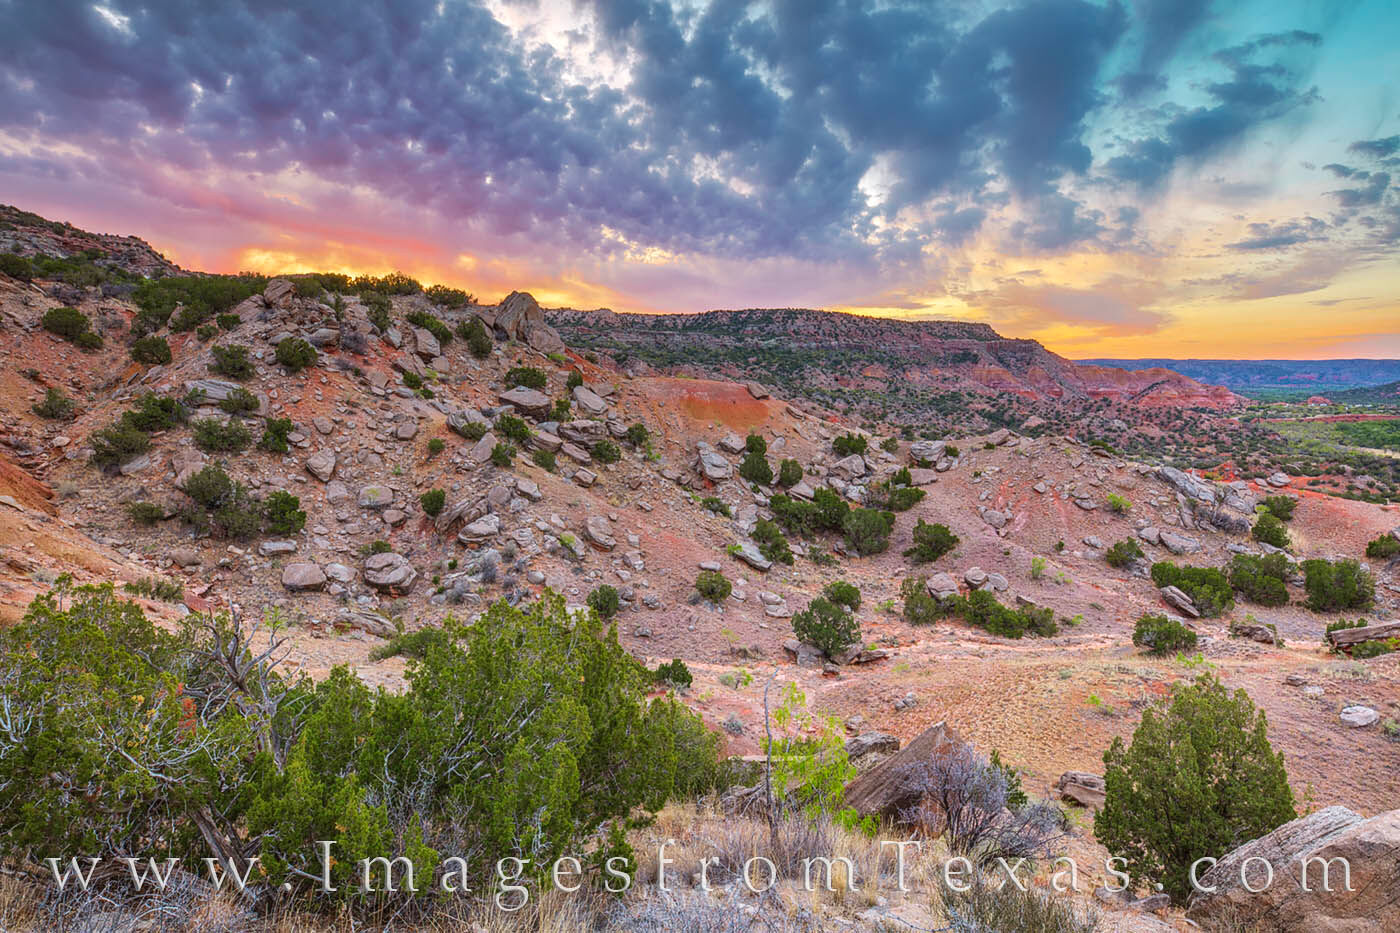 Sunrise brings vibrant colors to the Rock Garden Trail in Palo Duro Canyon.